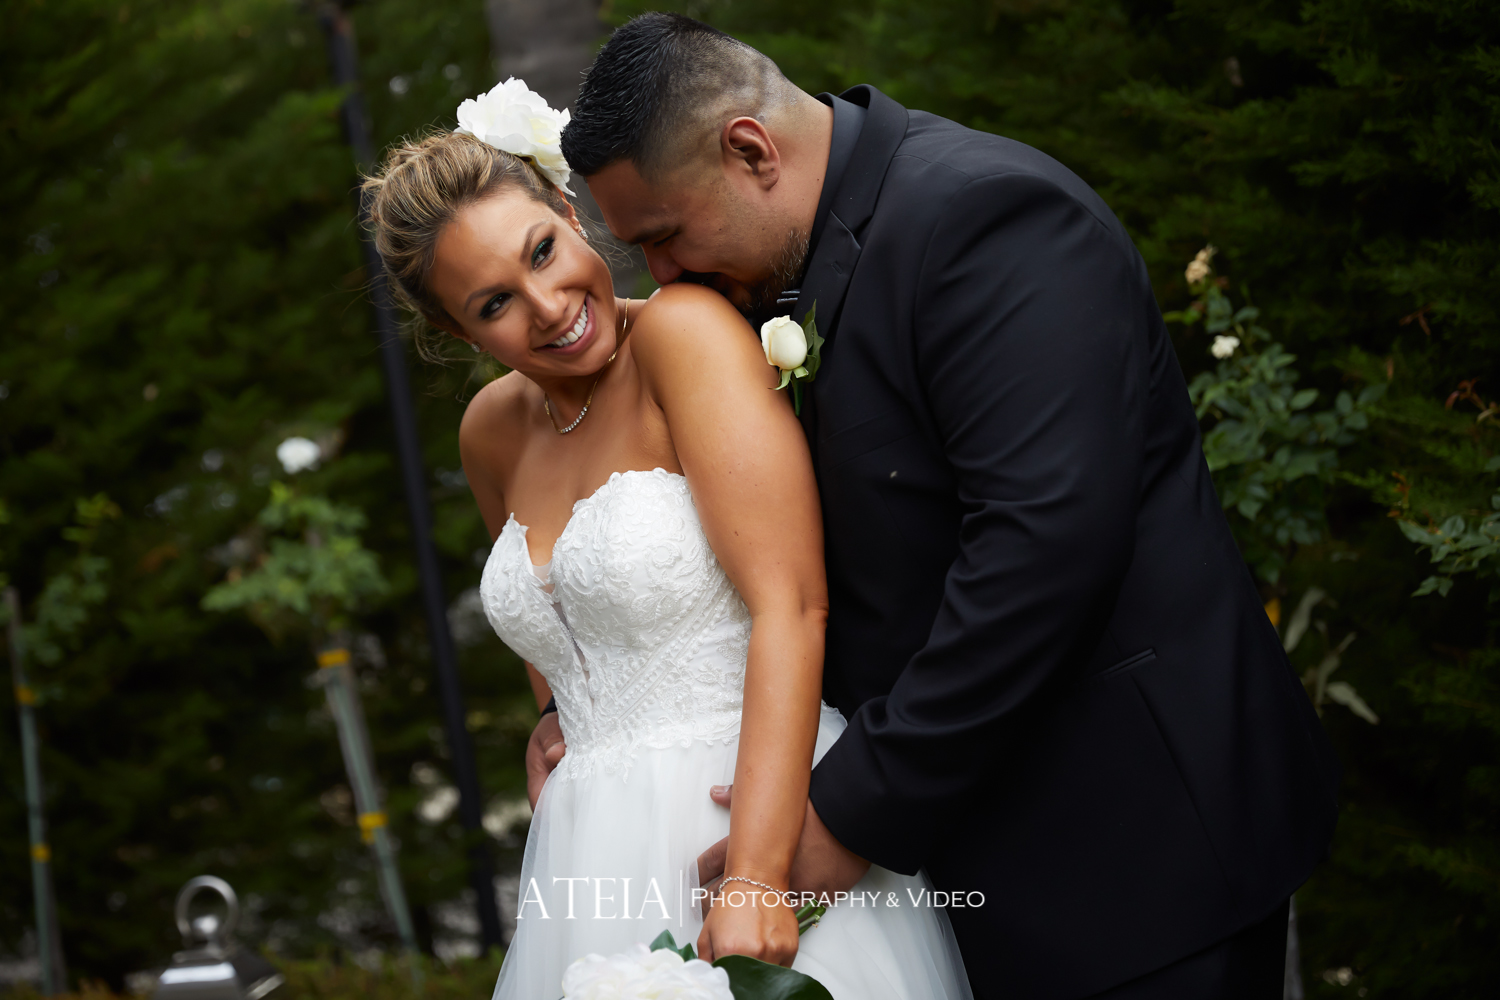 , Vogue Ballroom Wedding Photography Melbourne by ATEIA Photography &#038; Video